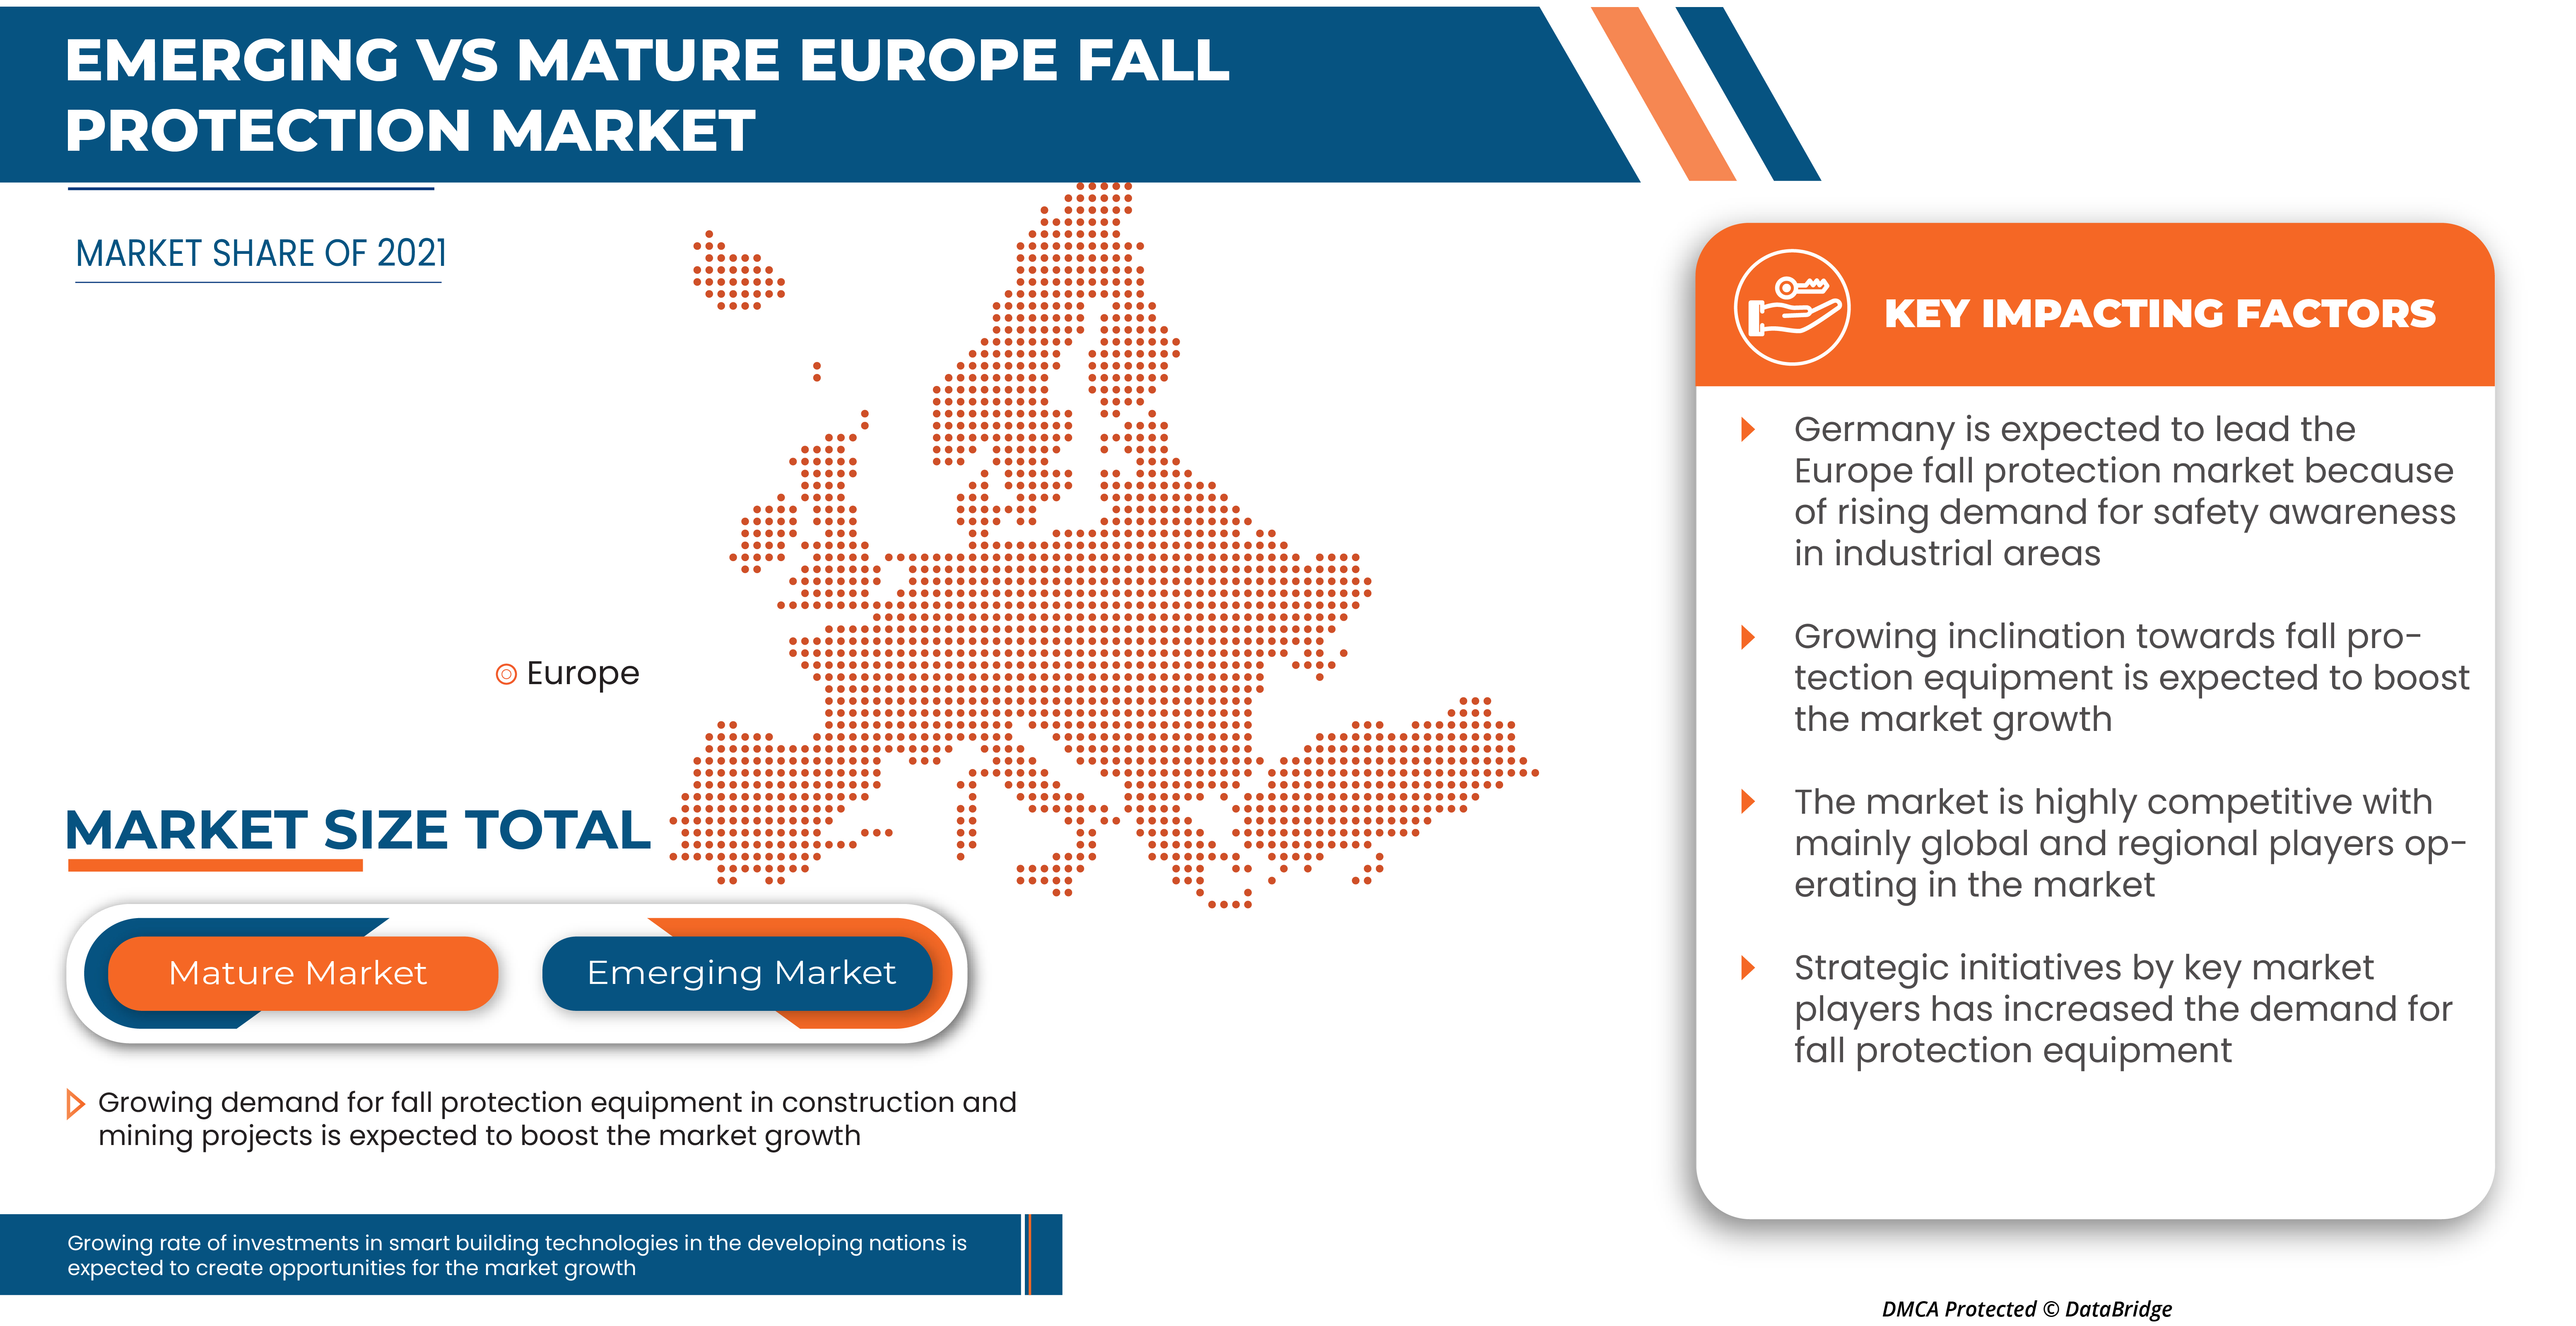 Europe Fall Protection Market